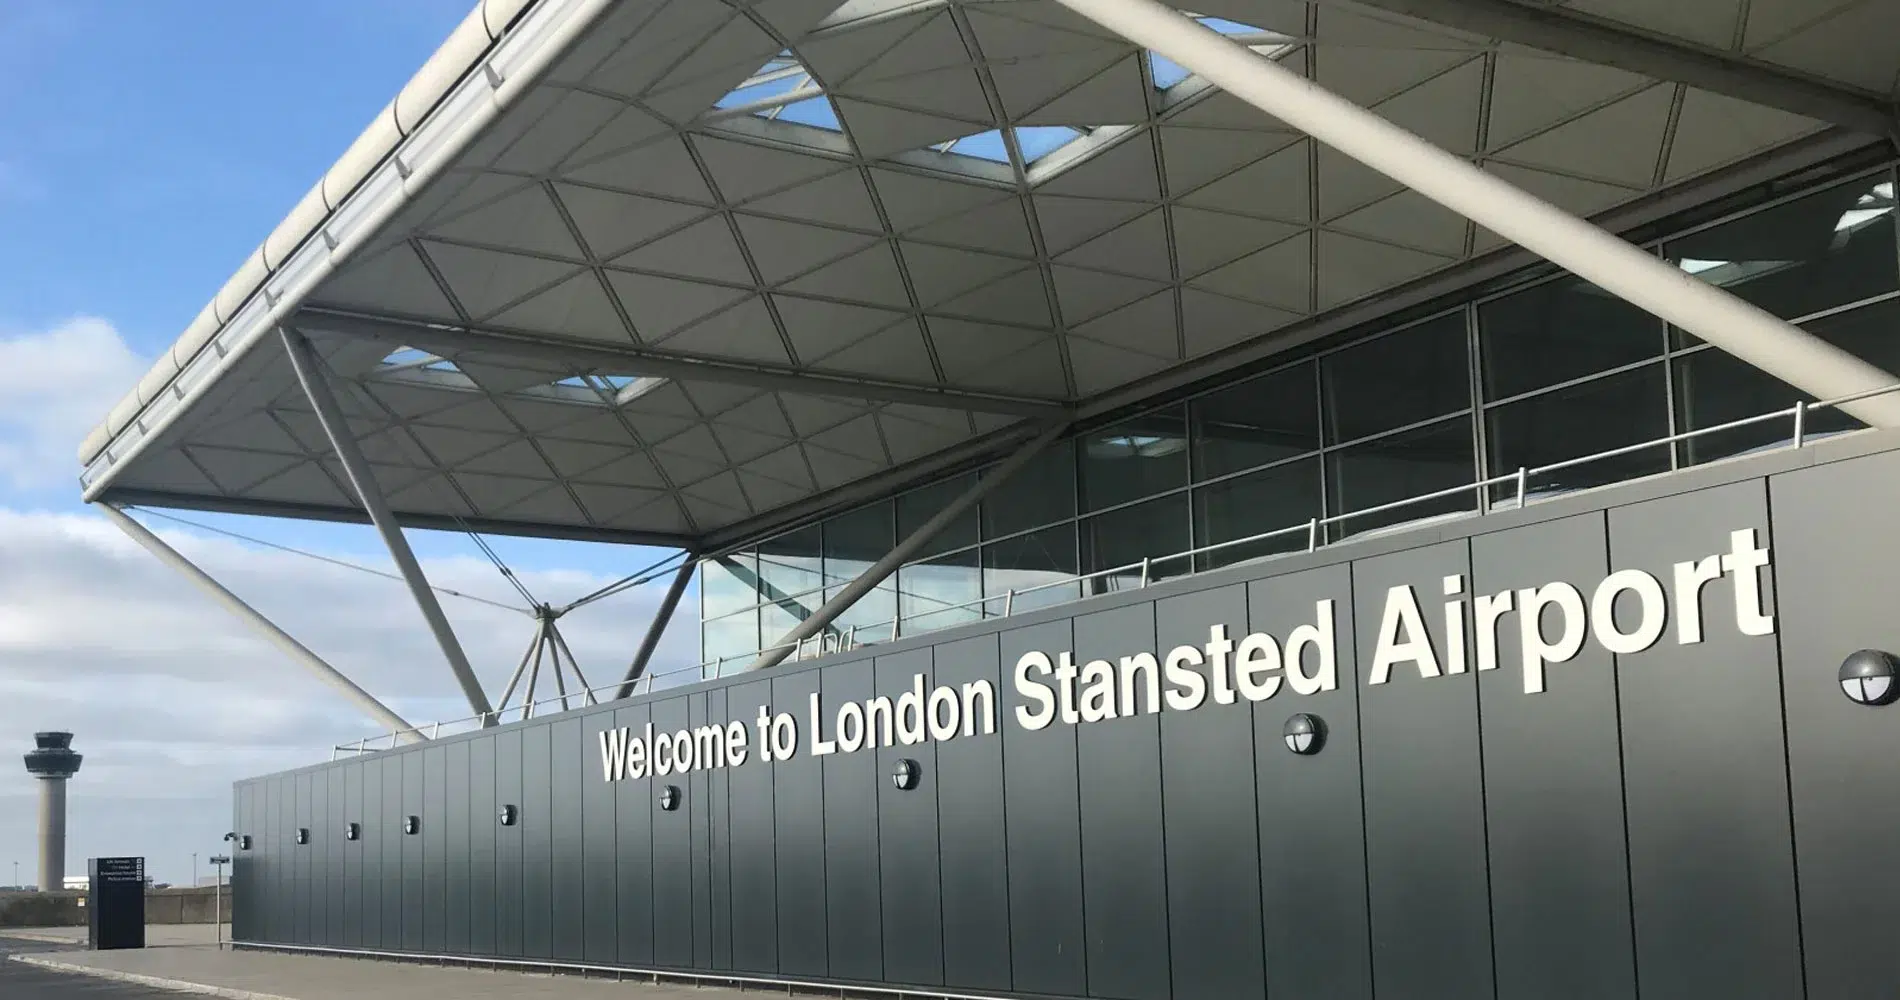 London Stansted Airport STN in London